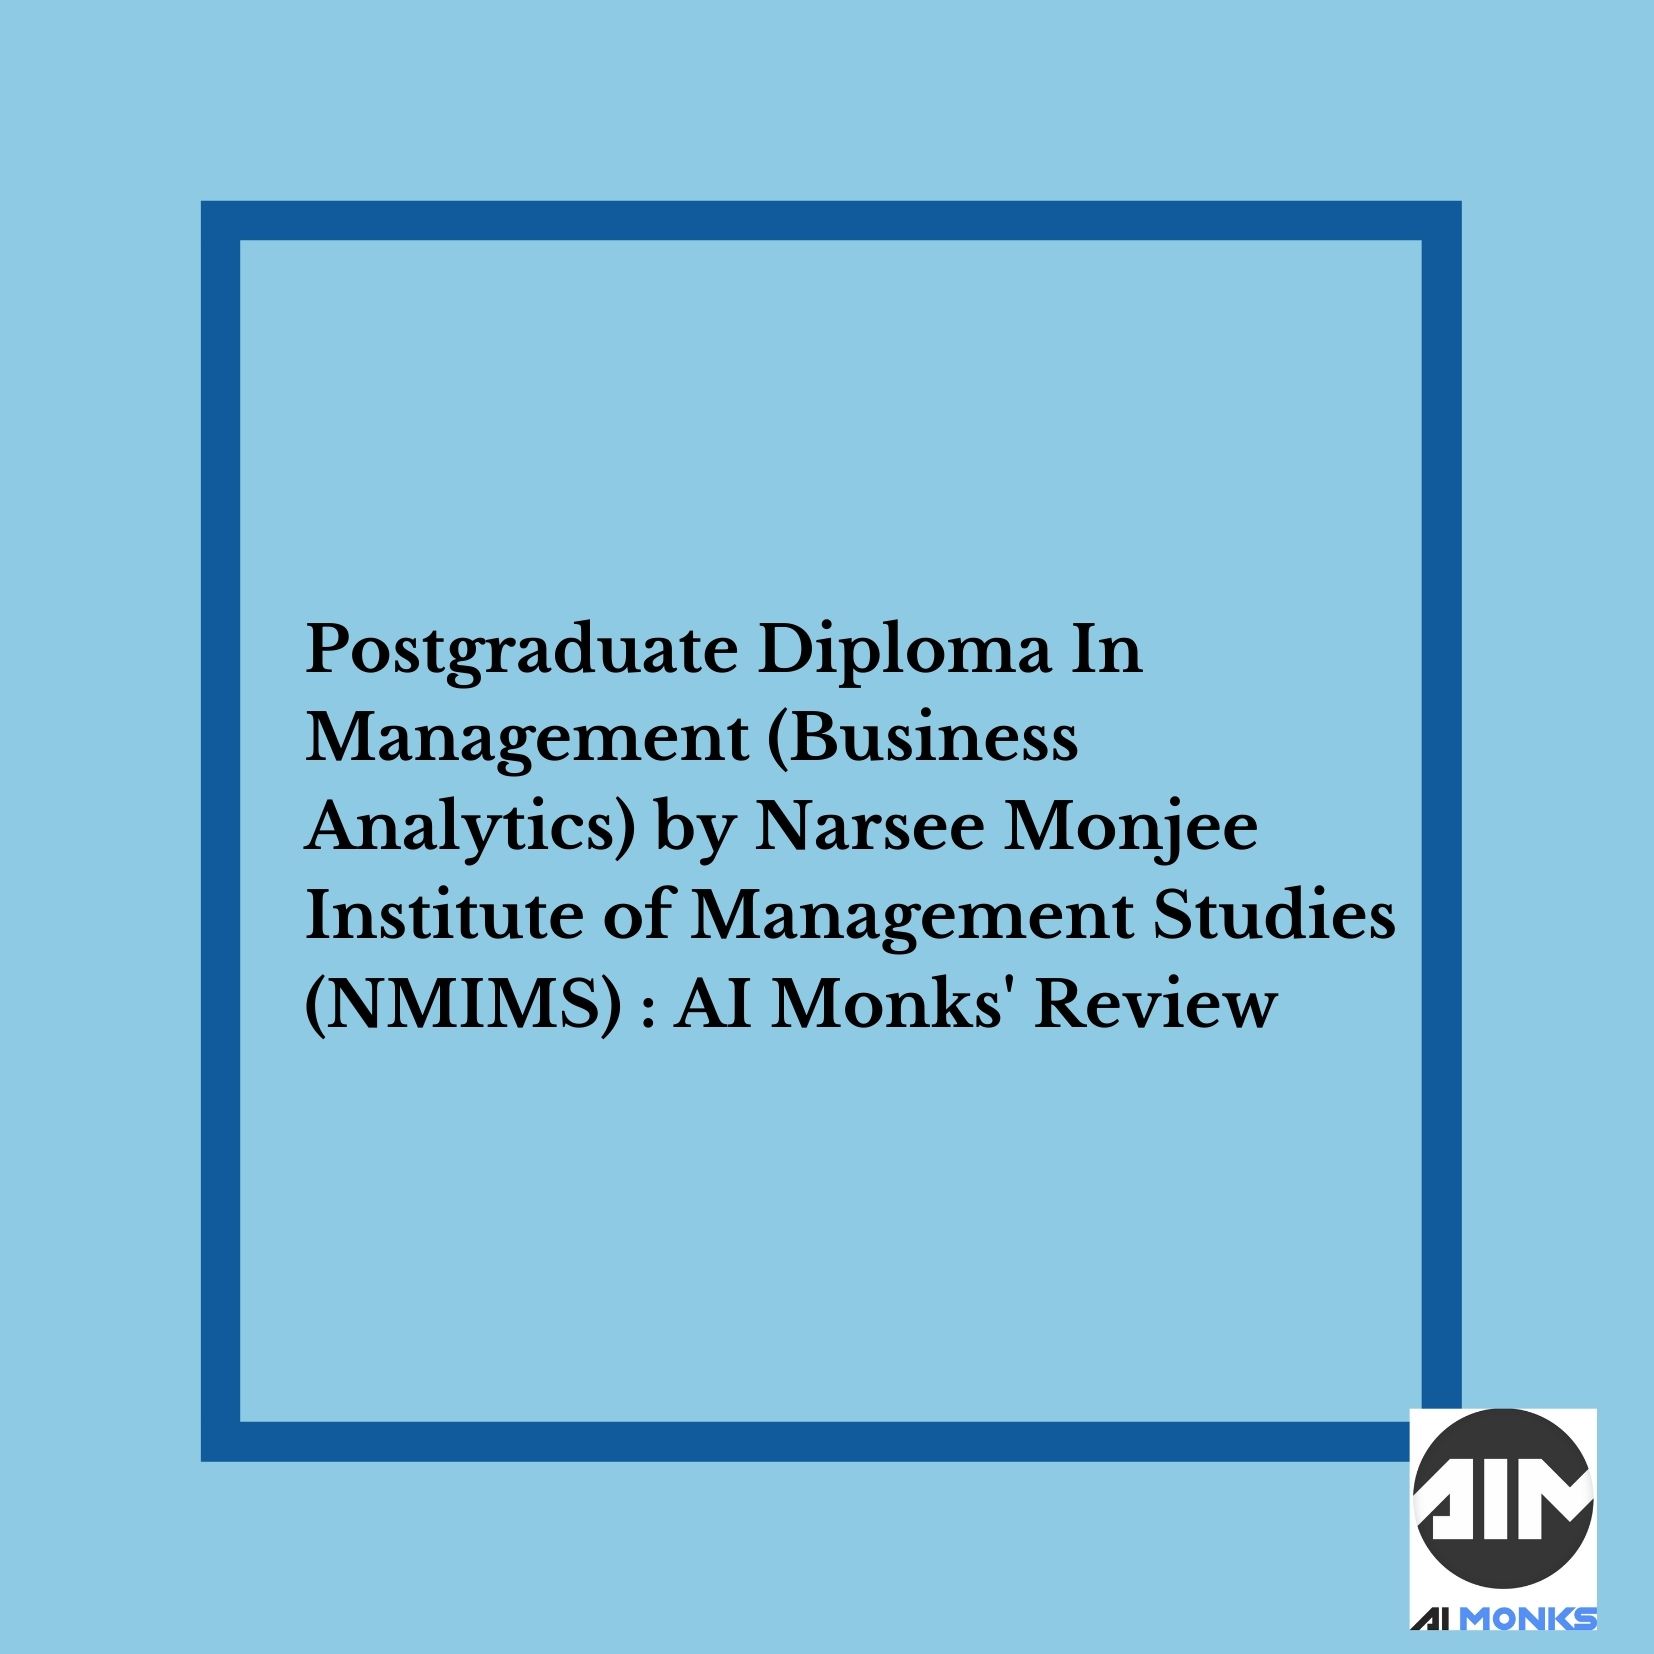 Postgraduate Diploma In Management(PGDM) Business Analytics by Narsee Monjee Insitute of Management Studies(NMIMS): AI Monks' Review